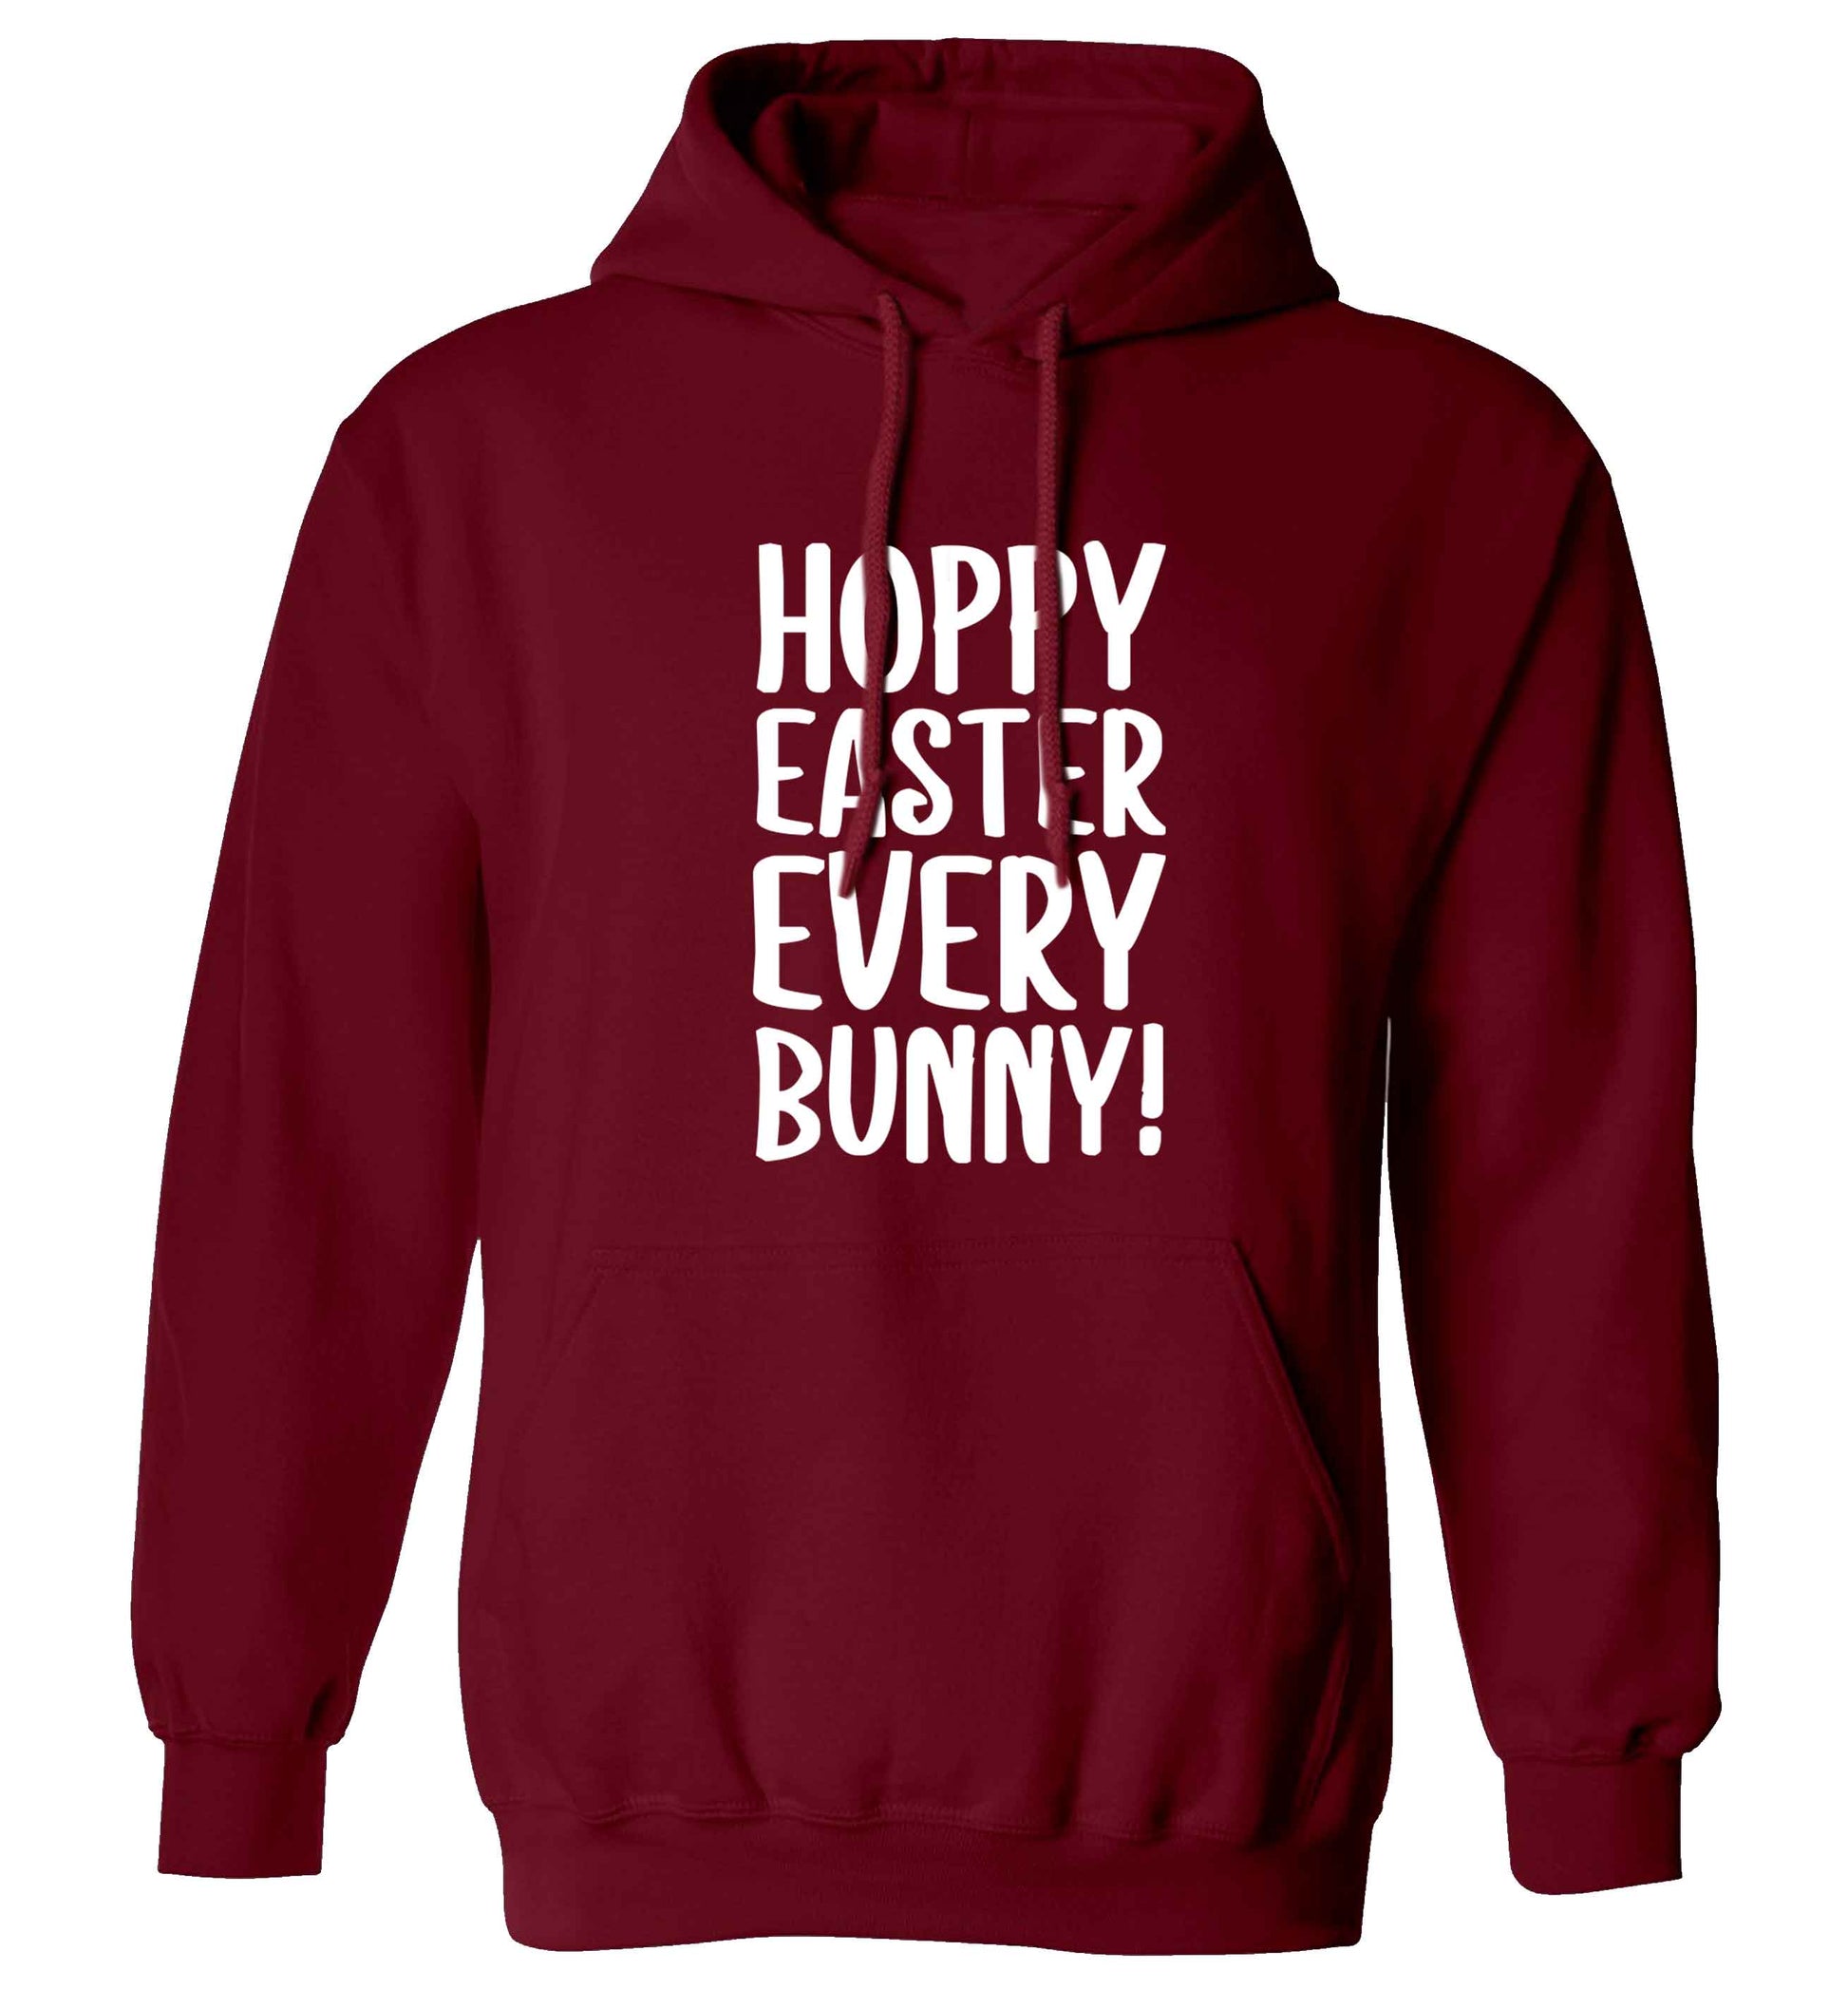 Hoppy Easter every bunny! adults unisex maroon hoodie 2XL